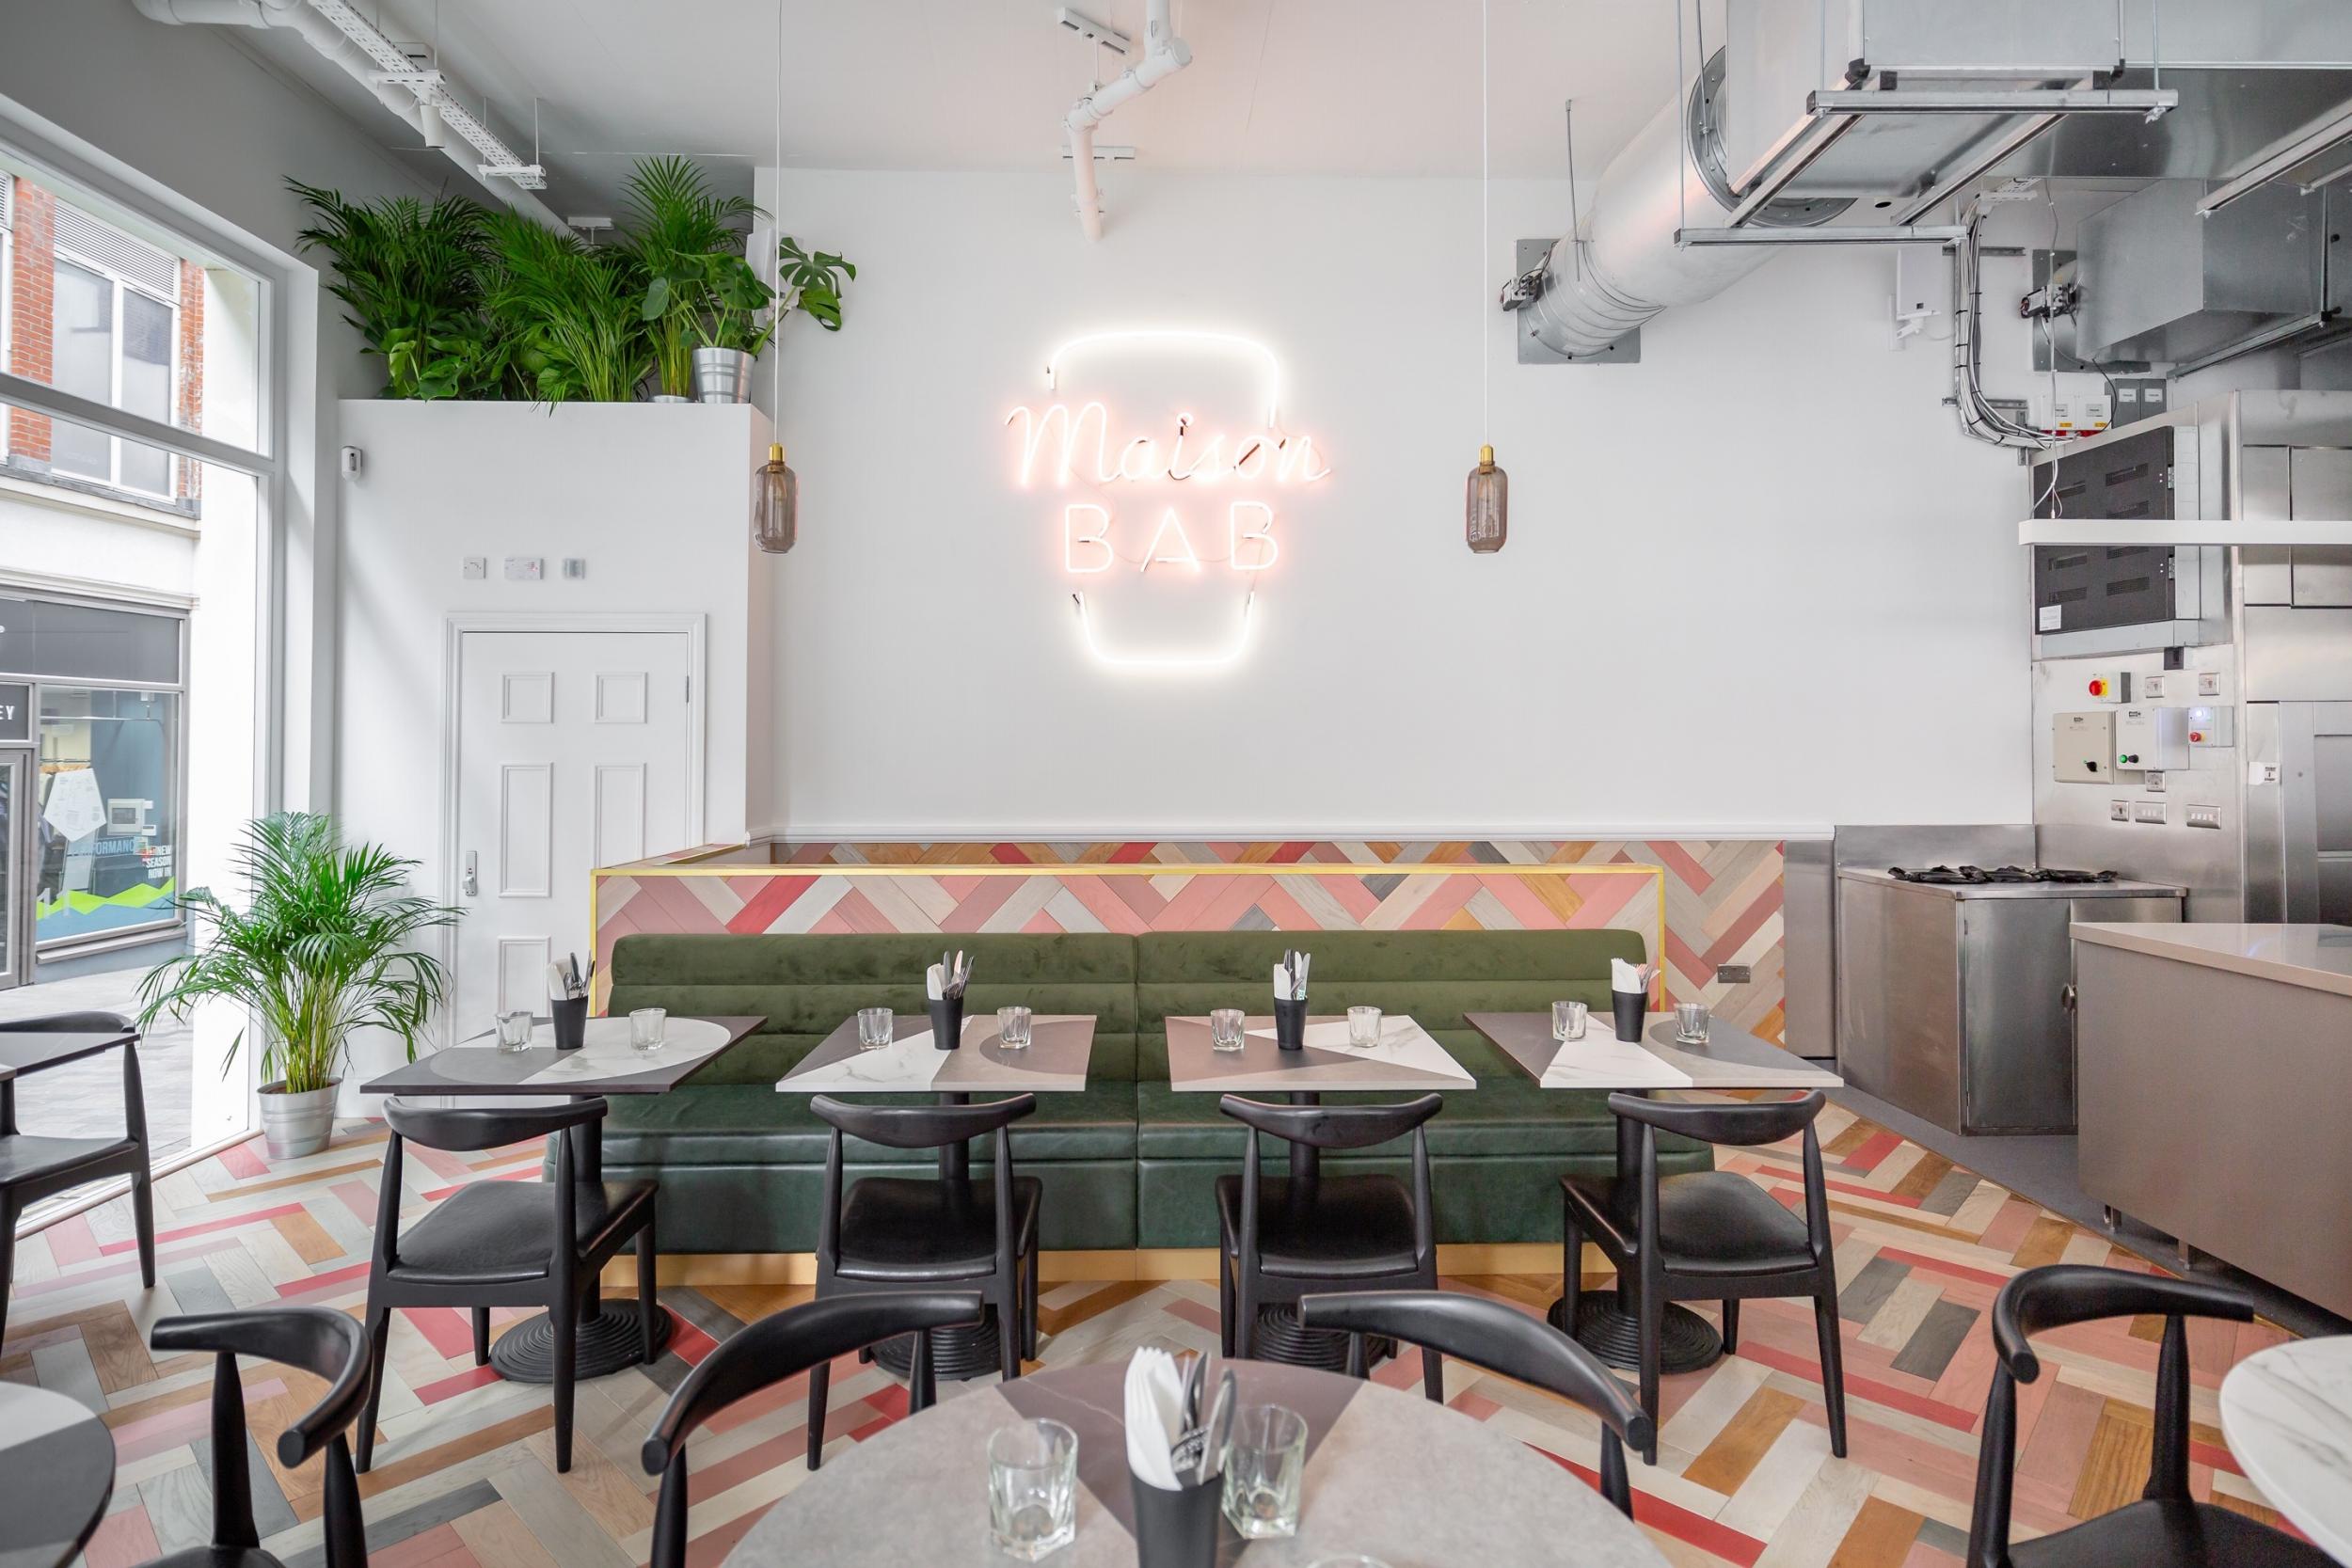 There is something laudable unfussy about the new sister restaurant of Le Bab